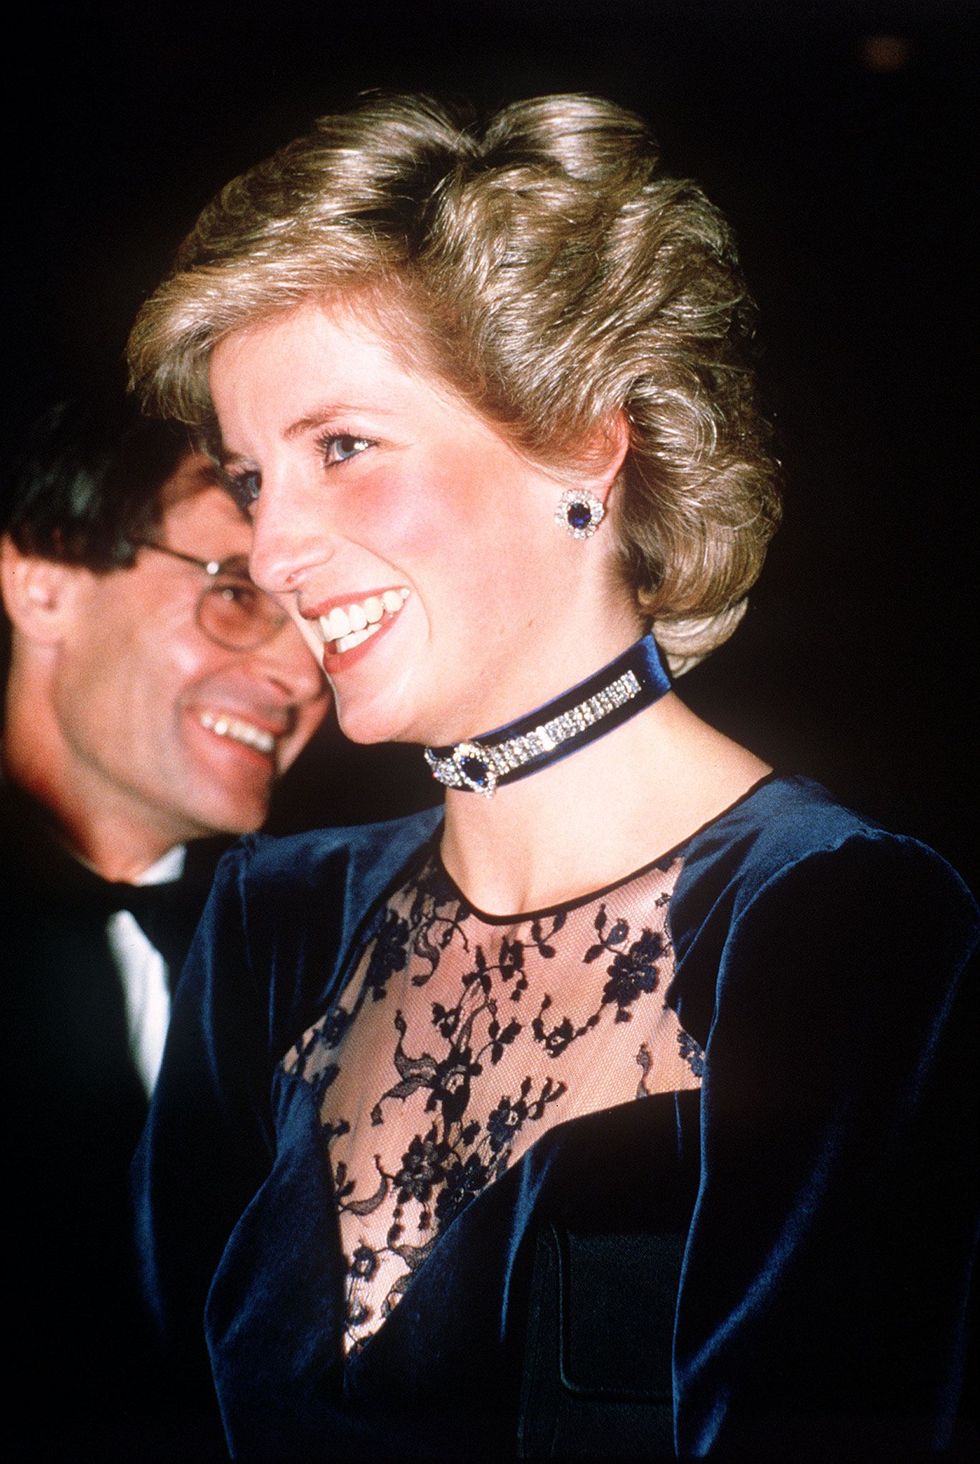 princess diana attends film premiere  of santa claus the movie at the odeon cinema in leicester square, london,25th november 1985  photo by msimirrorpixgetty images